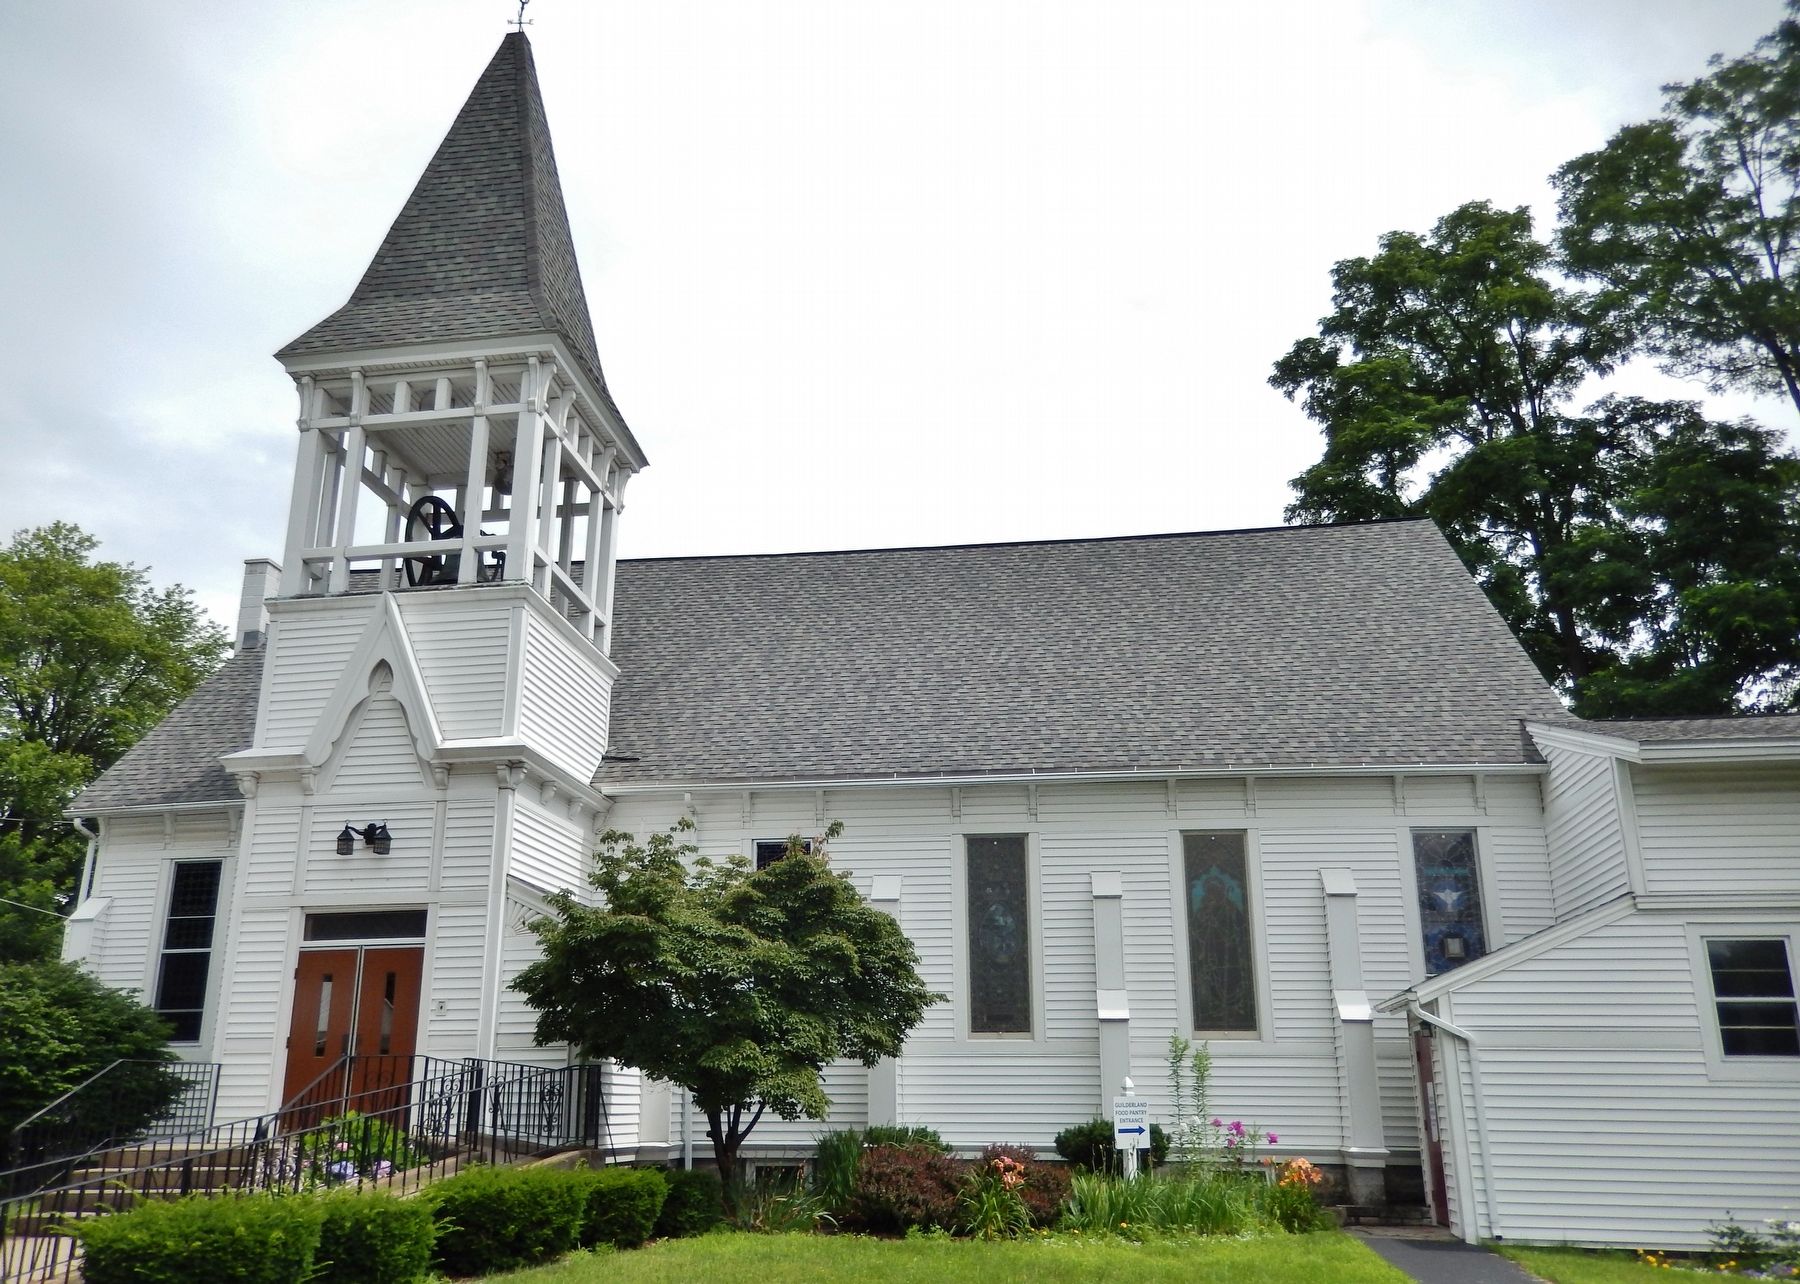 Hamilton Union Presbyterian Church (<i>currently at this location</i>) image. Click for full size.